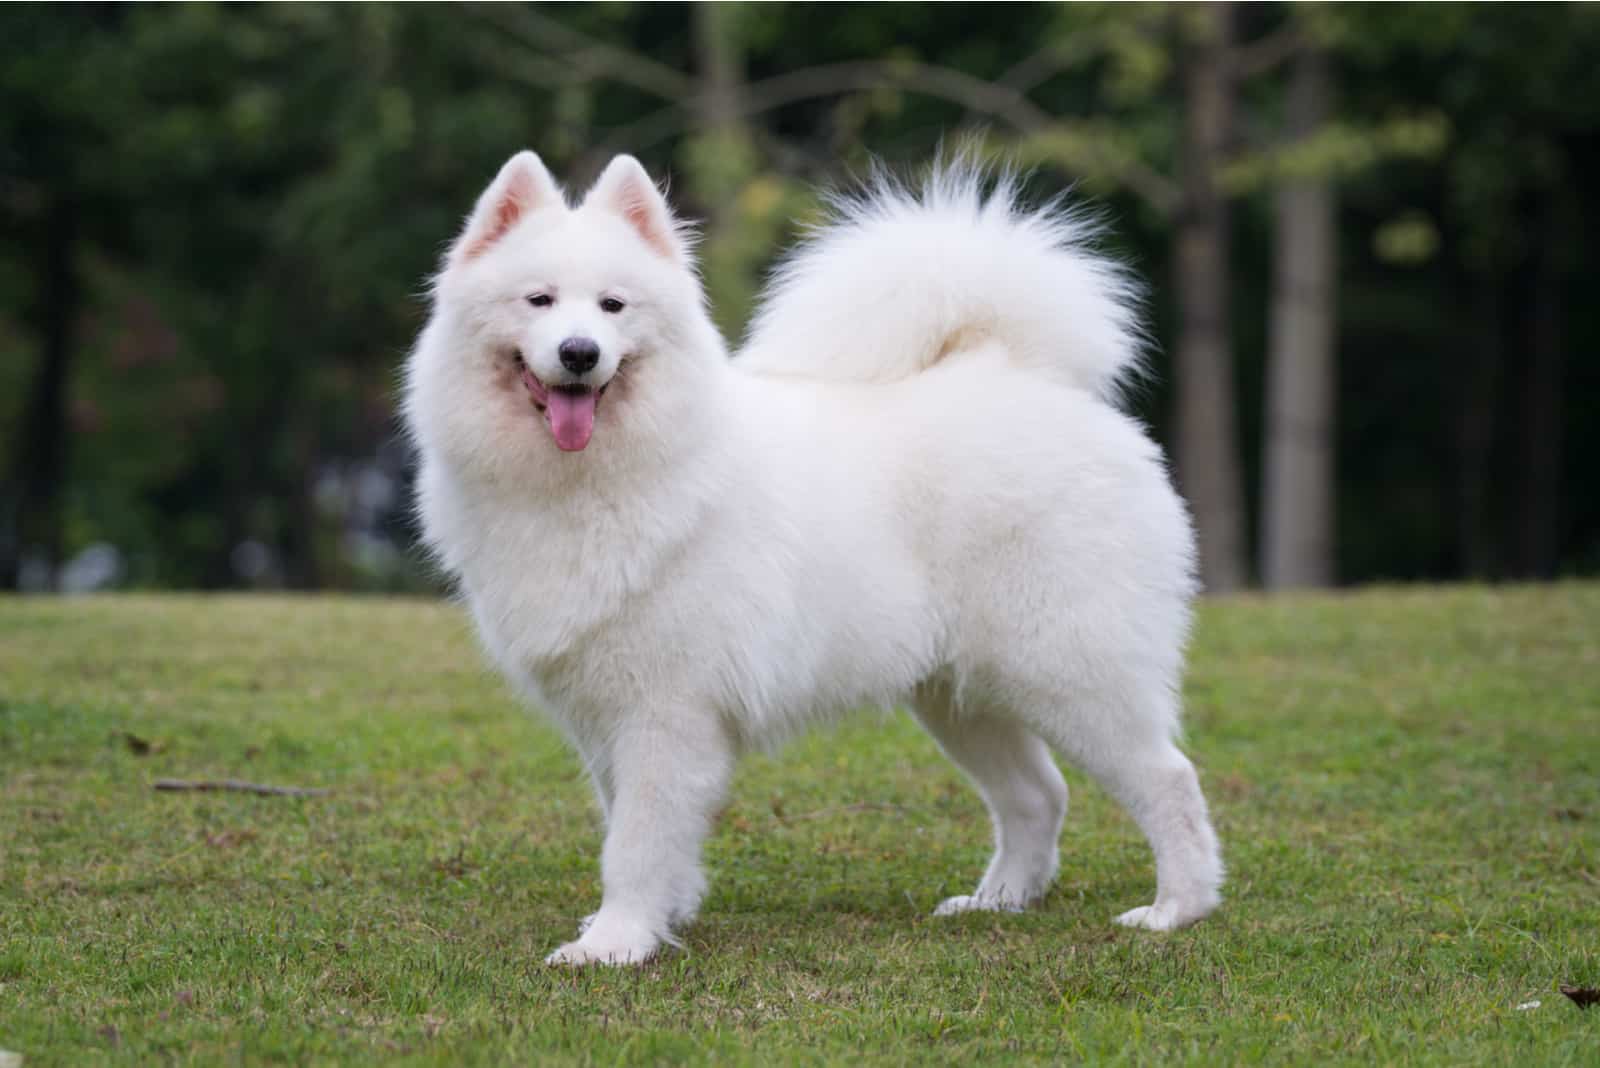 samoyed dog on the grass in the park